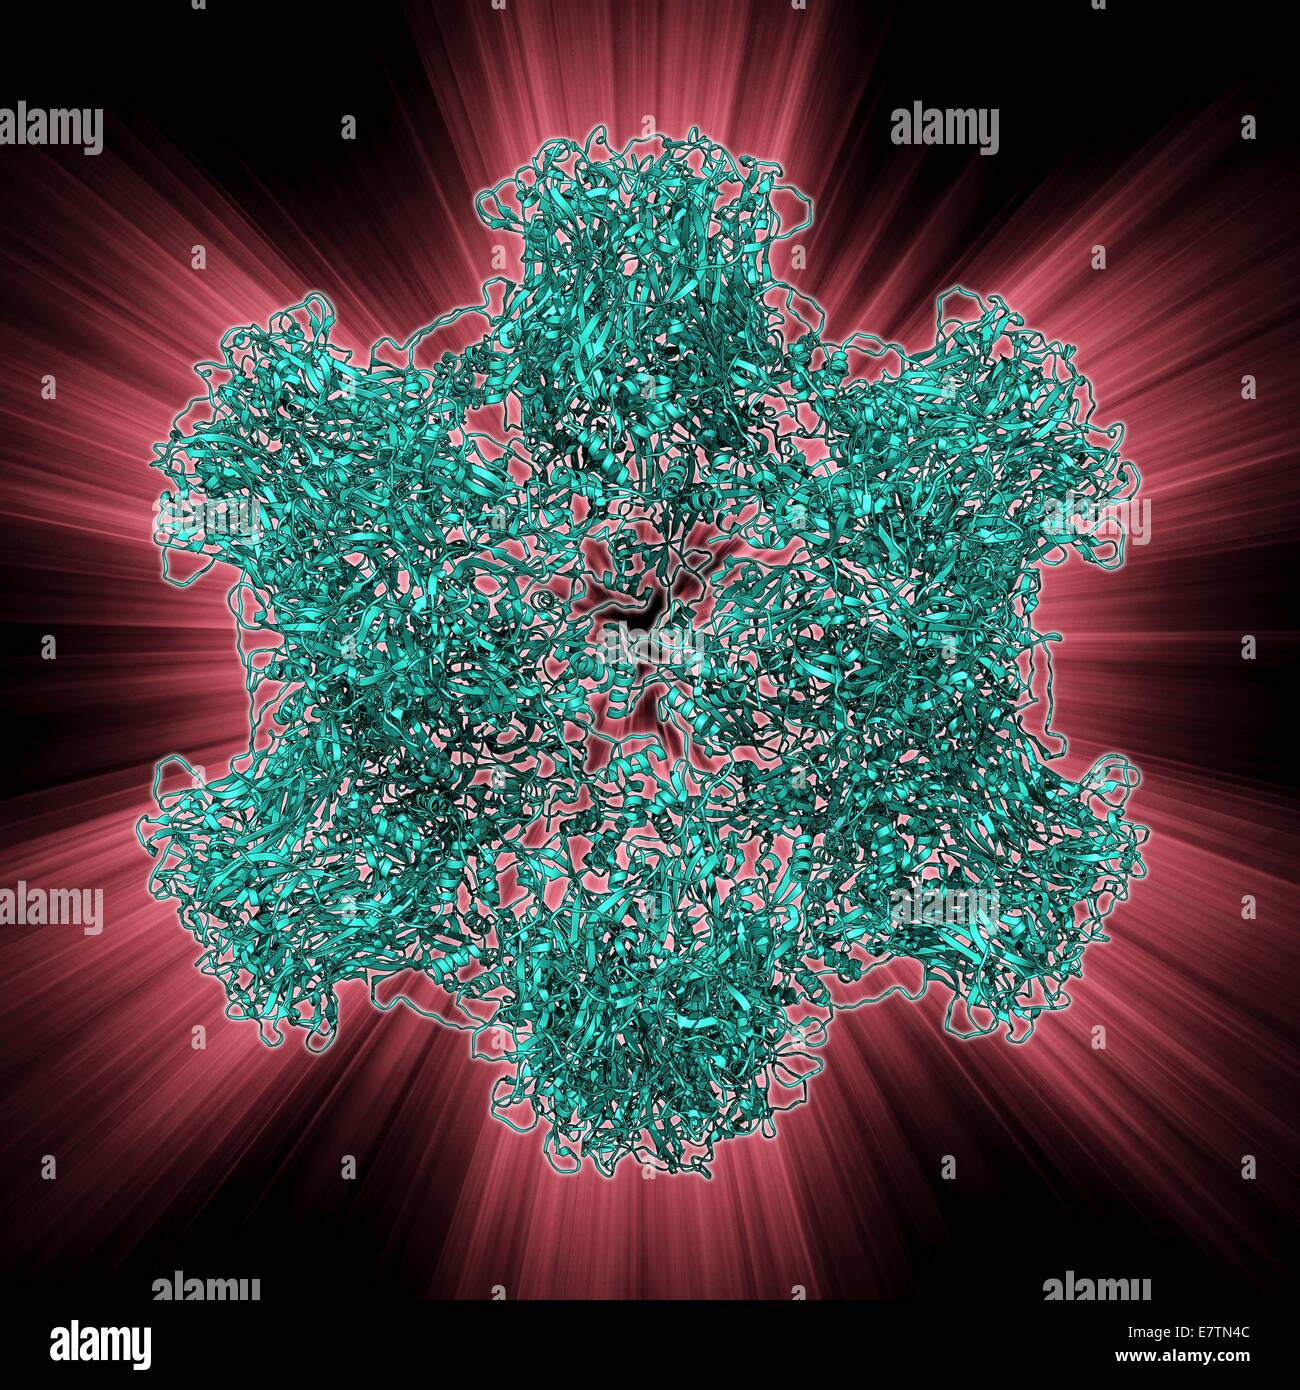 HPV surface protein L1, molecular model. This is a complex made up of the protein L1, found in the capsid (outer protein coat) of the human papilloma virus (HPV). L1 spontaneously forms a complex like this which resembles HPV. These complexes have been us Stock Photo